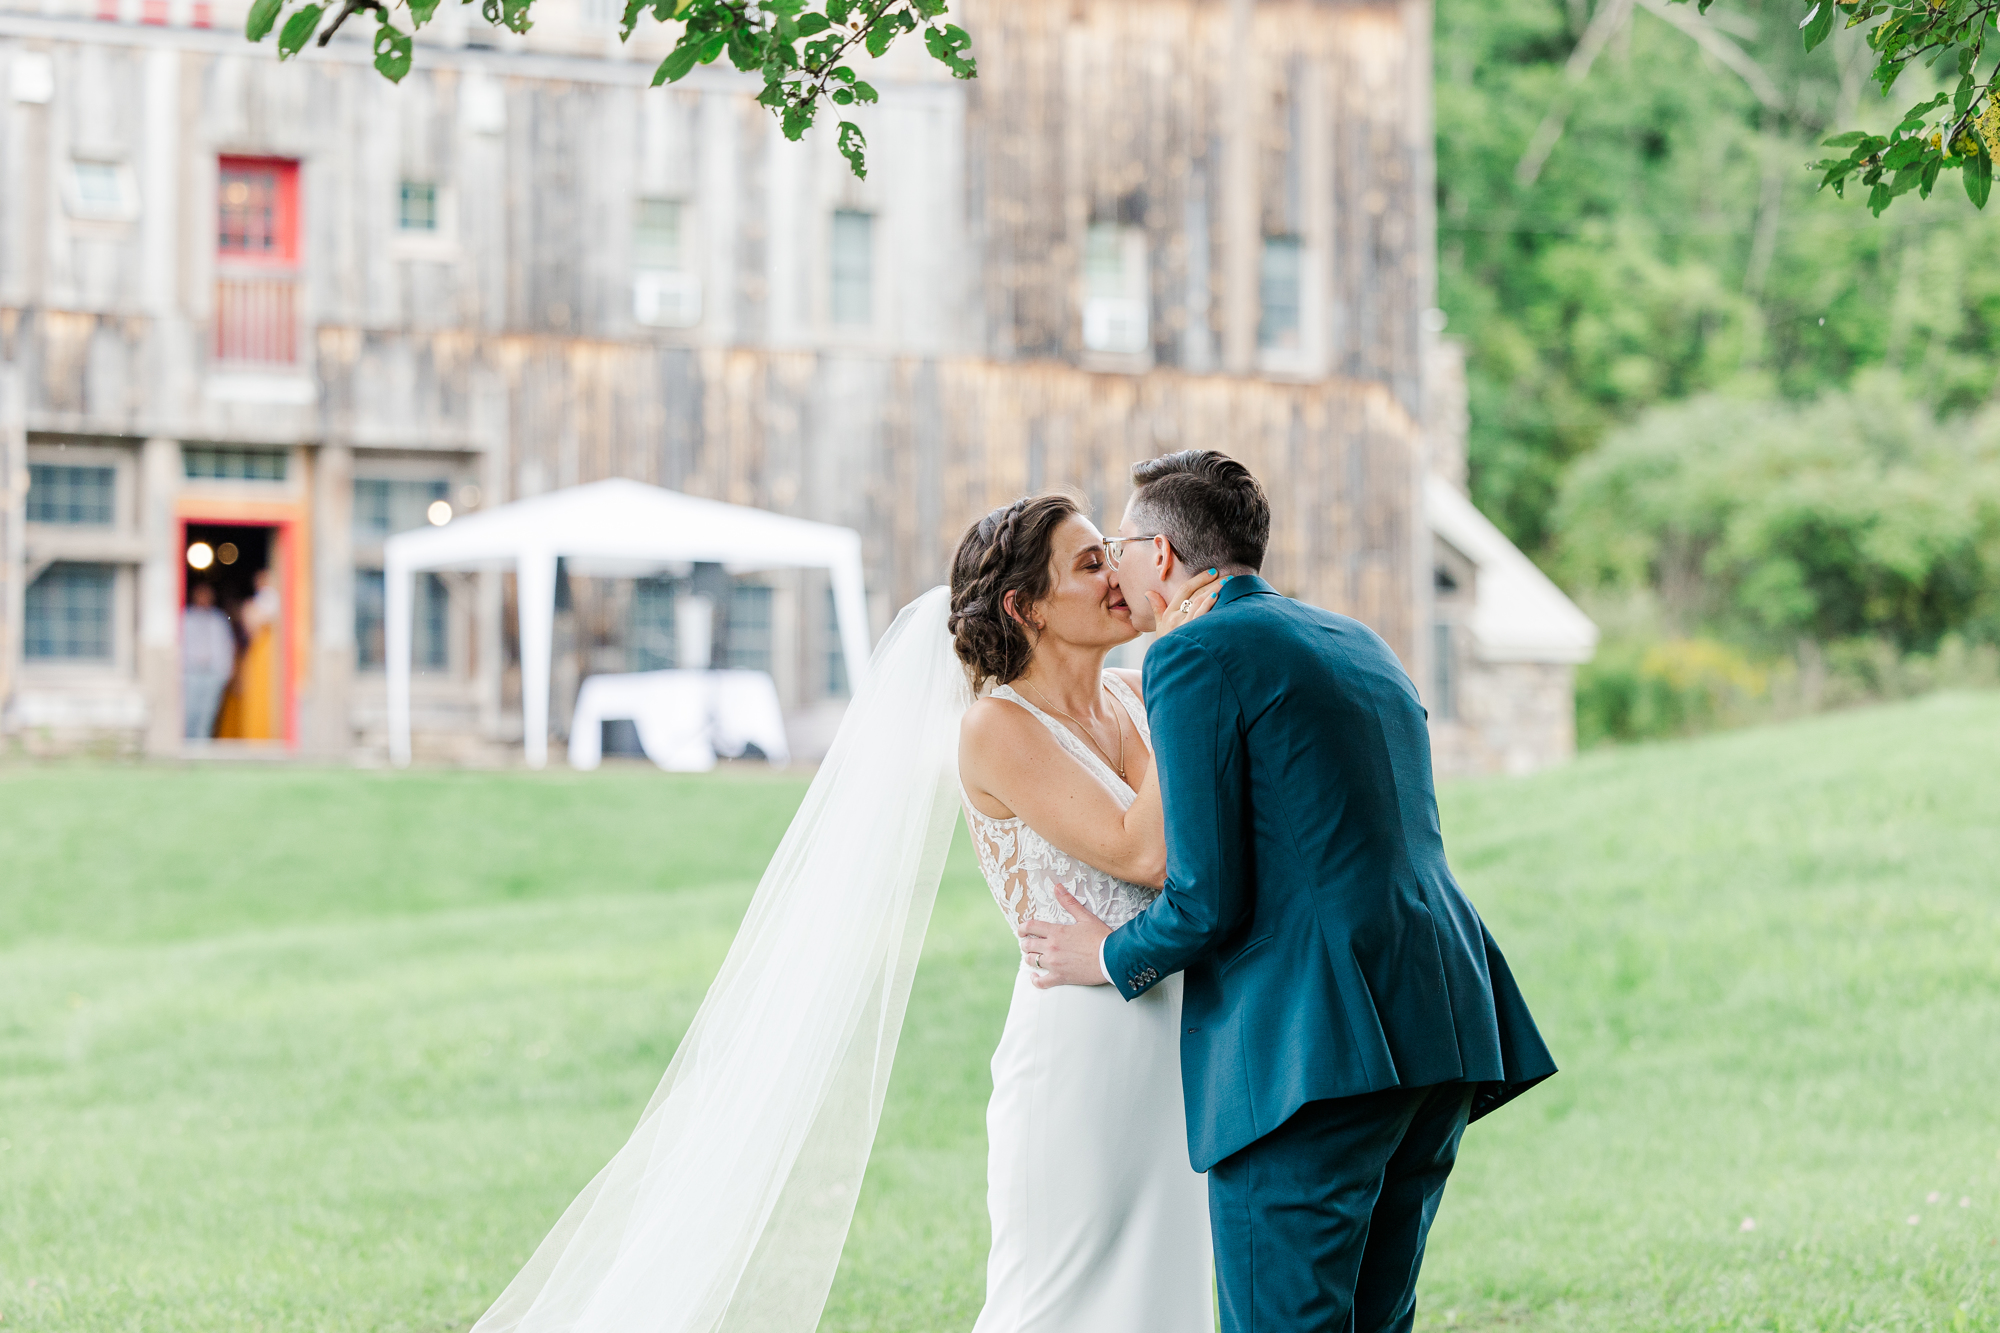 Exciting Upstate Wedding Photos at Cristman Barn in Ilion, New York